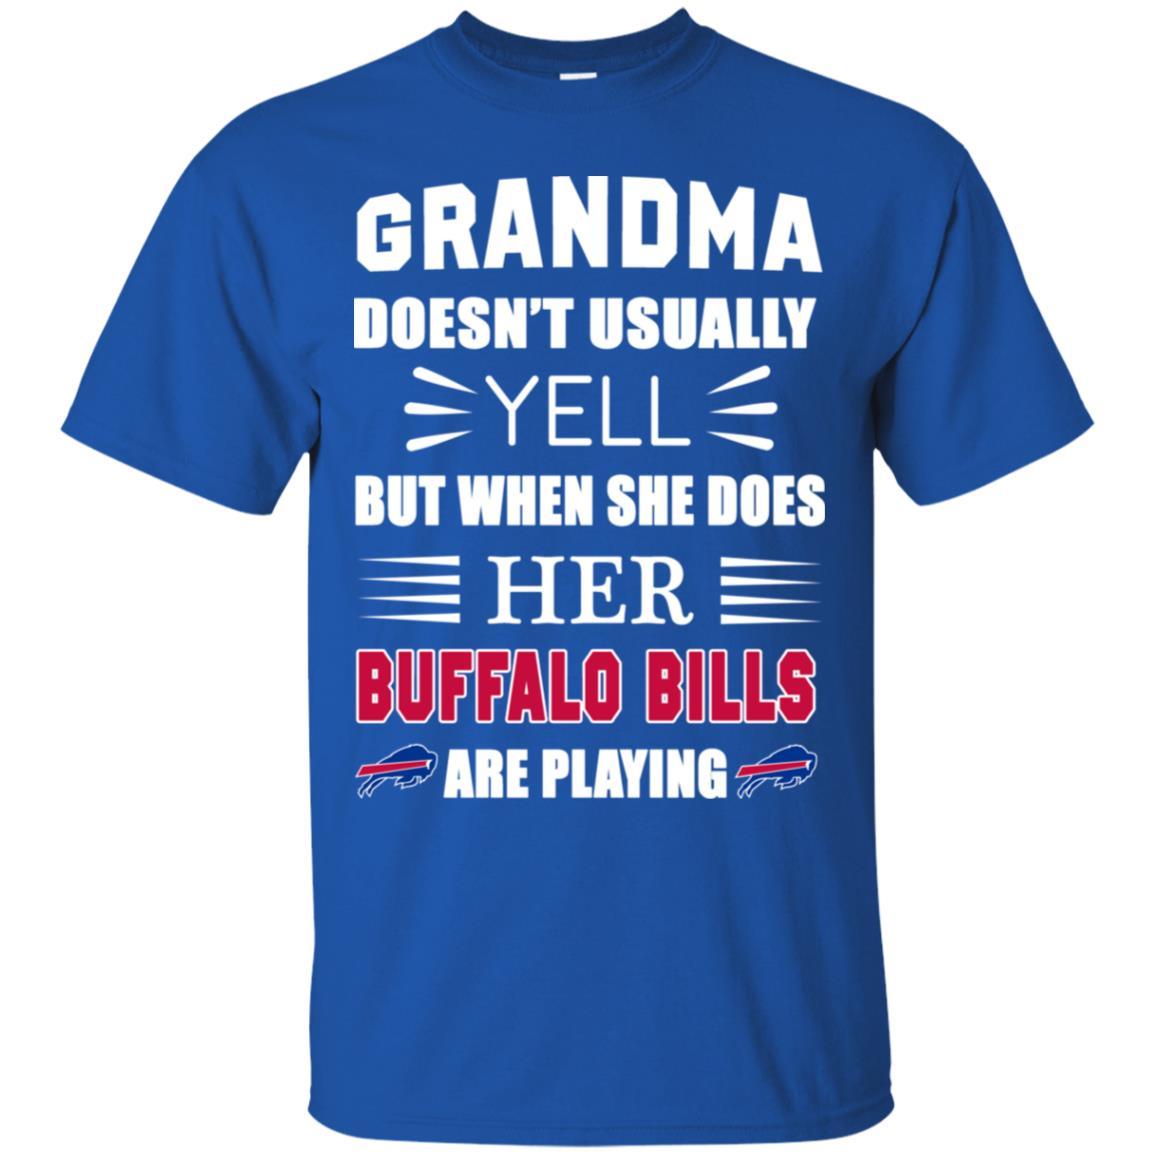 BUFFALO-BILLS-Cool-Grandma-Doesn't-Usually-Yell-She-Does-Her-T-SHIRT-FOR-FAN-2023